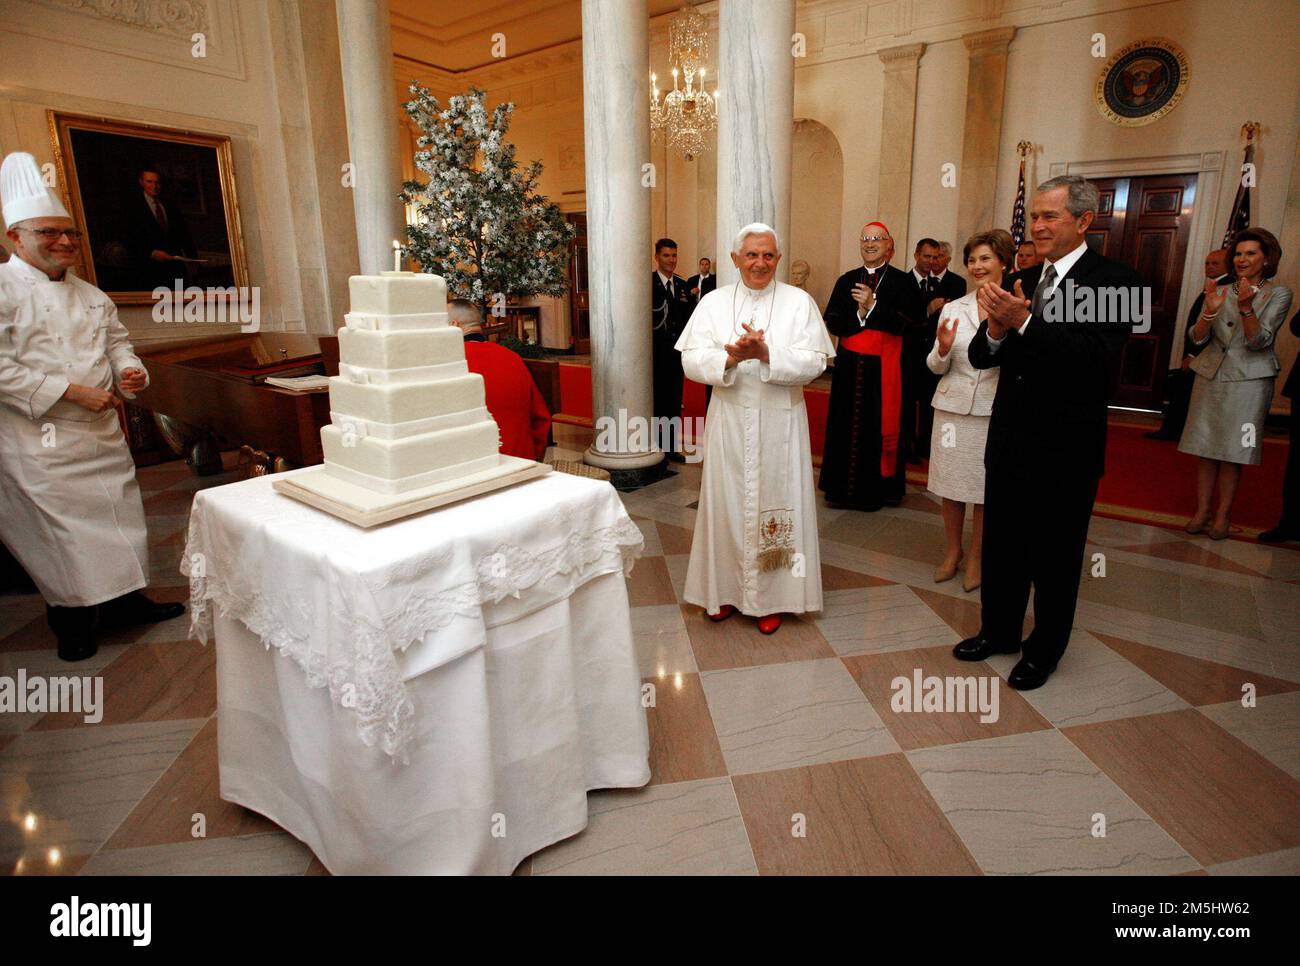 Washington, United States Of America. 16th Apr, 2008. United States President George W. Bush and Mrs. Laura Bush lead the celebration of the 81st birthday of Pope Benedict XVI as he's presented a cake by White House Pastry Chef Bill Yosses Wednesday, April 16, 2008, at the White House. White House photo by Eric Draper. Credit: Sipa USA/Alamy Live News Stock Photo